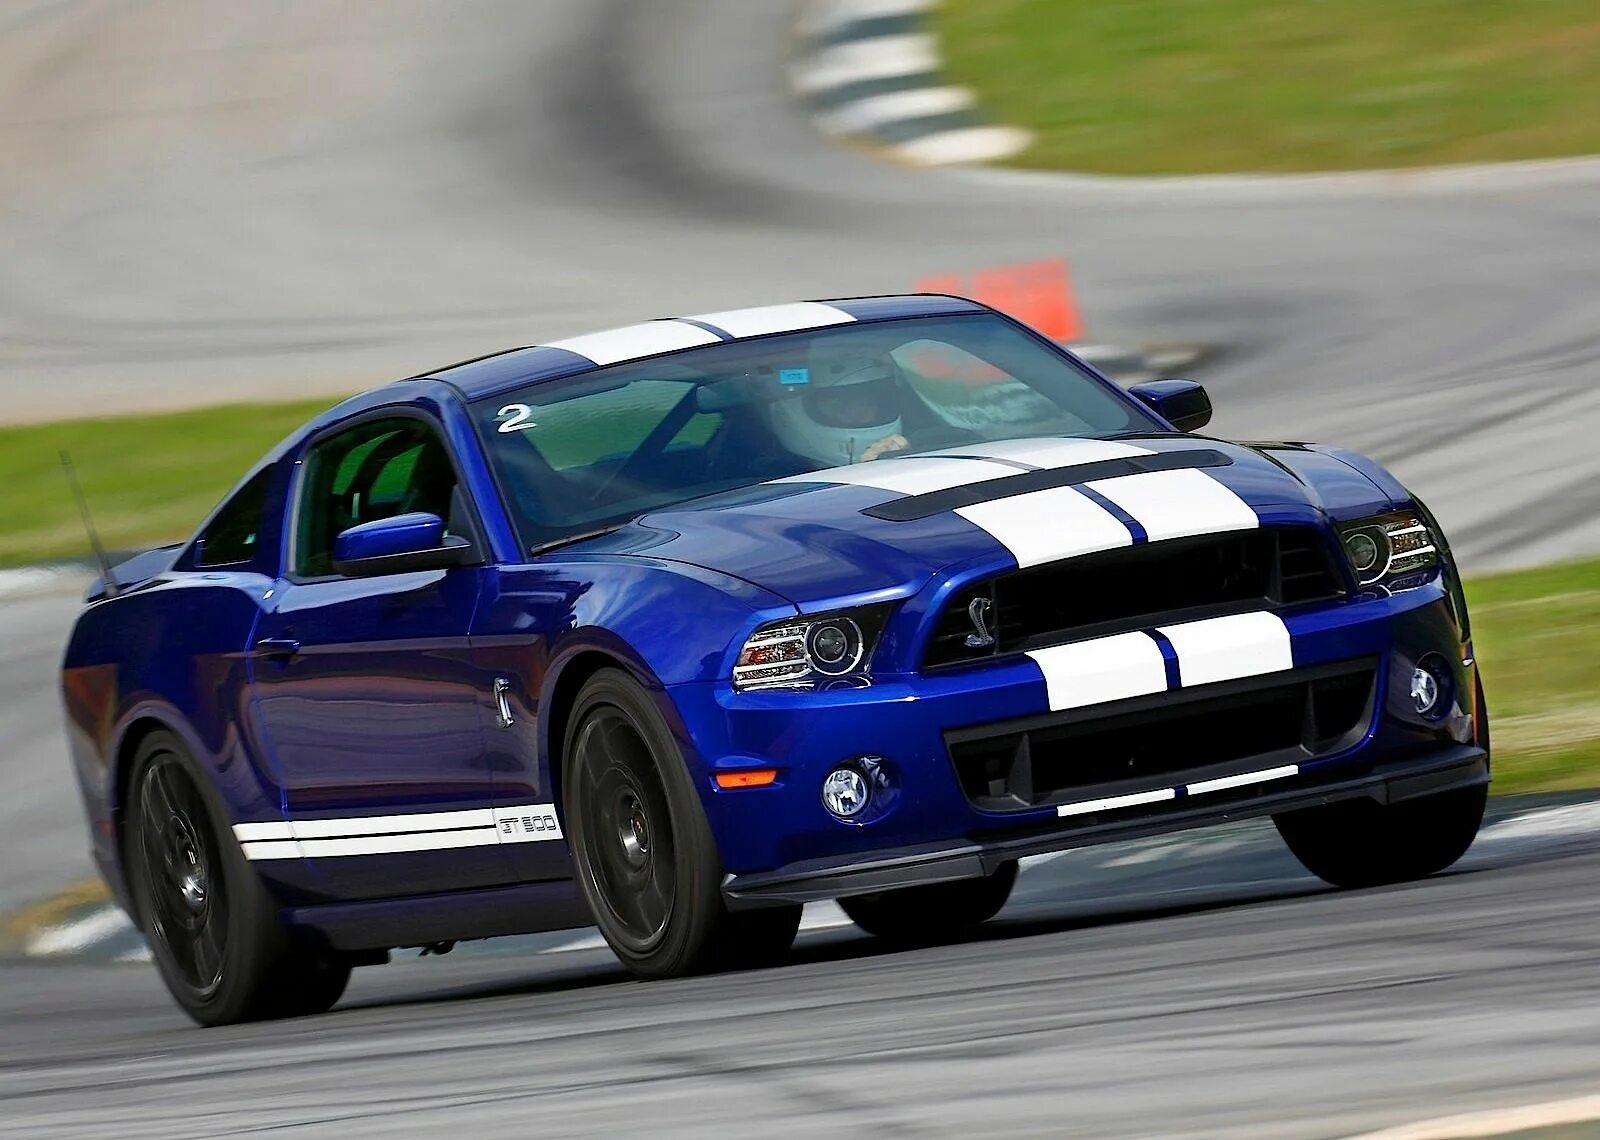 Форд Мустанг gt 500 Shelby. Ford Shelby gt500. Ford Mustang gt500. Ford Mustang Shelby gt500 2011. Mustang shelby gt